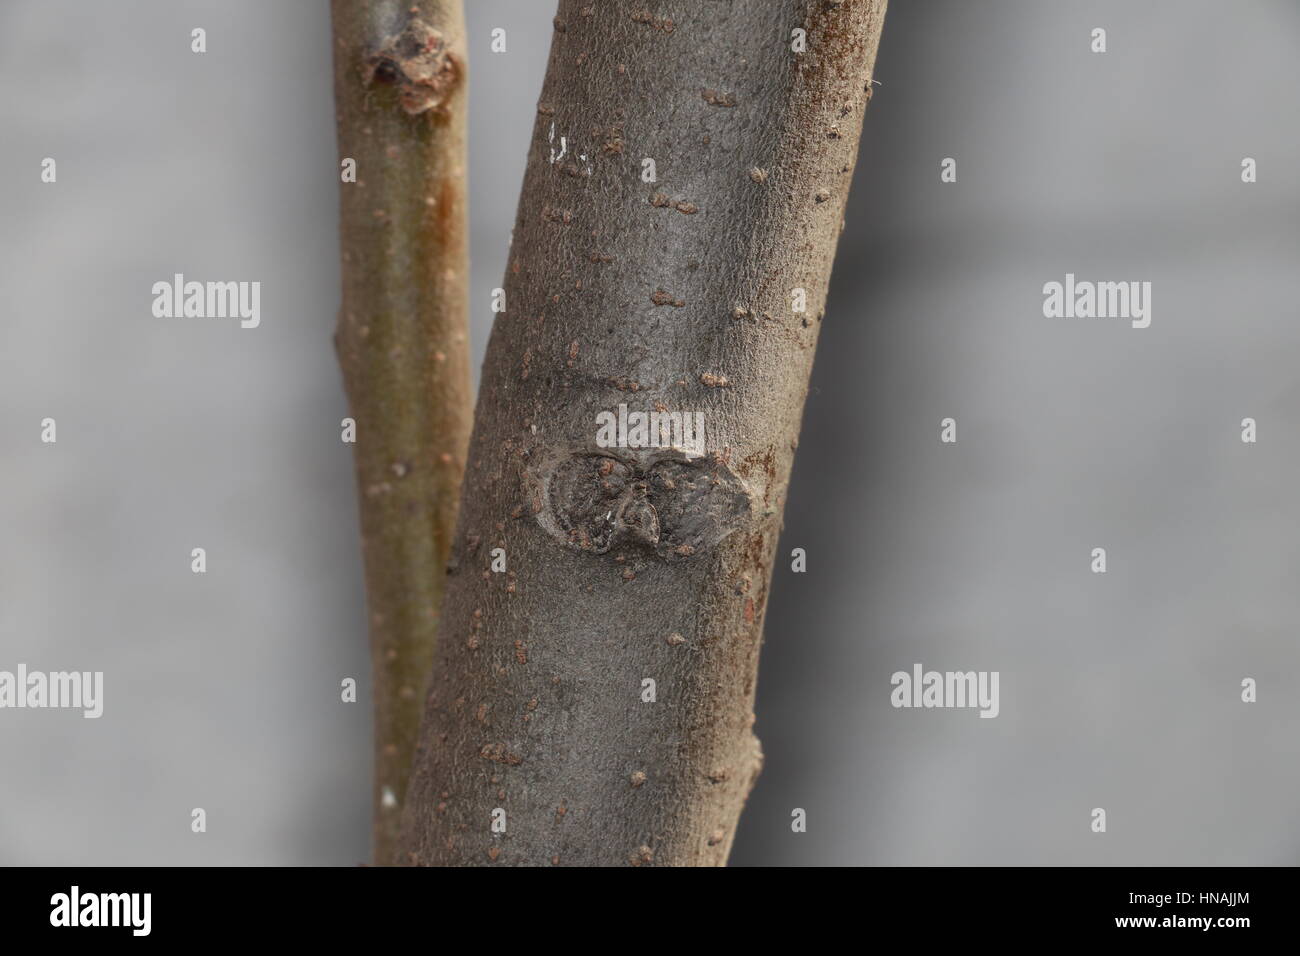 Tree and Stems Focused Stock Photo